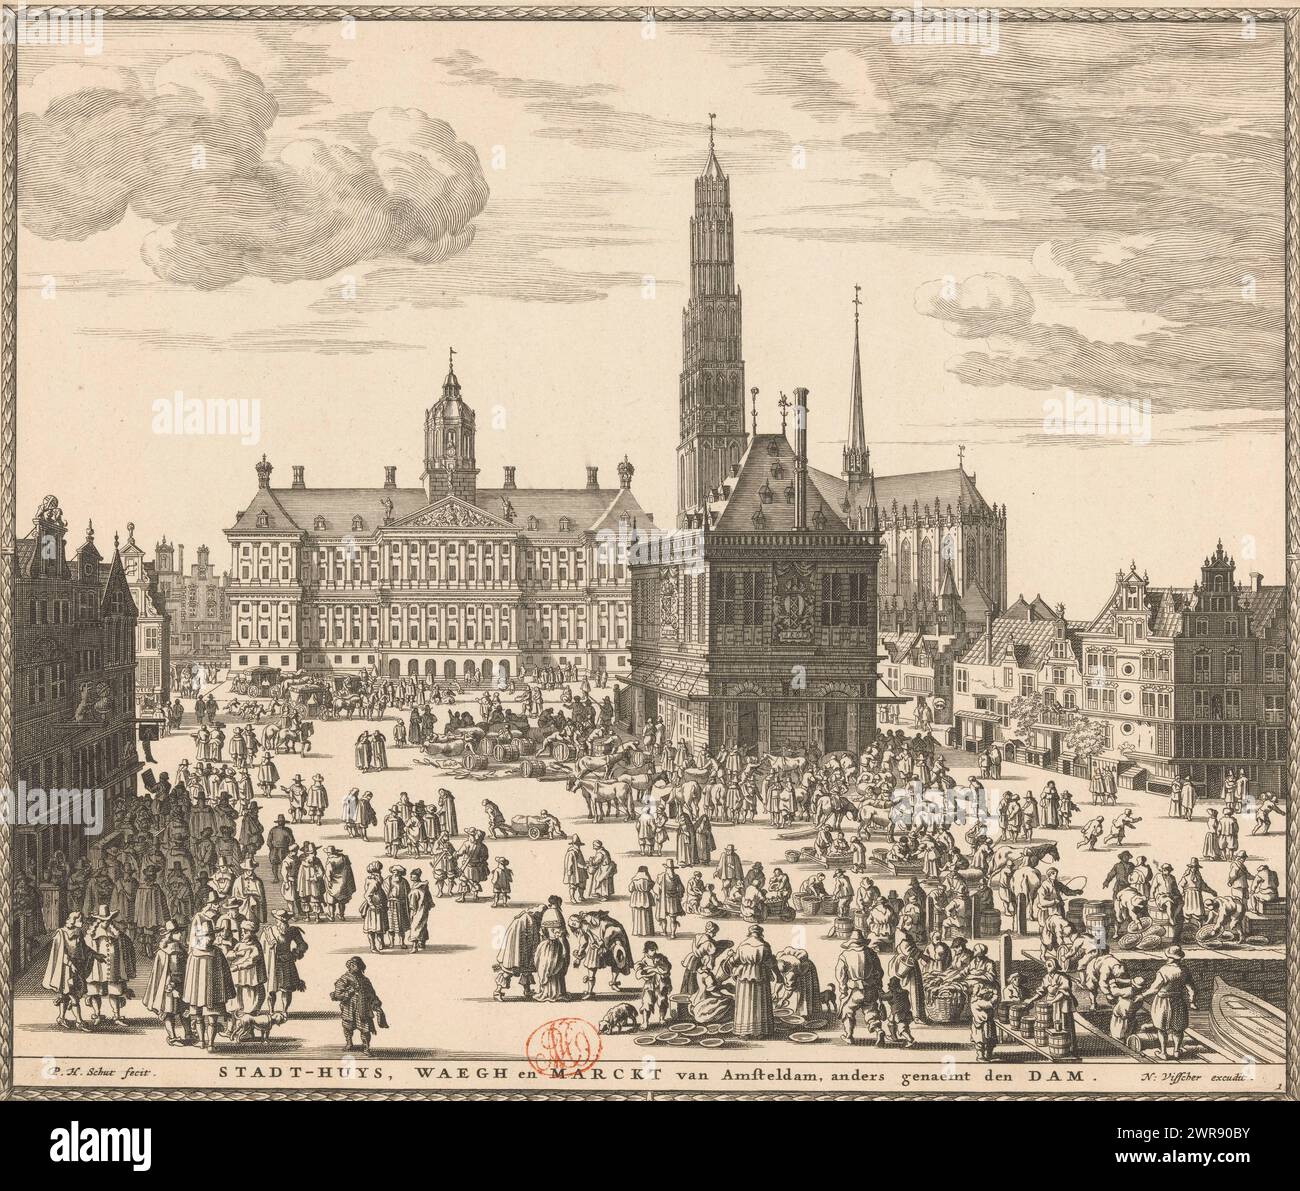 View of the City Hall, the Nieuwe Kerk and the Waag on Dam Square in Amsterdam, Stadt-Huys, Waegh and Marckt van Amsteldam, otherwise known as the Dam (title on object), Eight buildings in Amsterdam (Schut / Visscher) (series title), View of the Dam in Amsterdam. To the left of the center is the Town Hall. To the right of the center is the Nieuwe Kerk with the never completed tower, in front of which is the Waag. Numbered bottom right: 1., print maker: Pieter Hendricksz. Schut, publisher: Nicolaes Visscher (I), publisher: Nicolaes Visscher (II ), Amsterdam, 1662 - 1720, paper Stock Photo